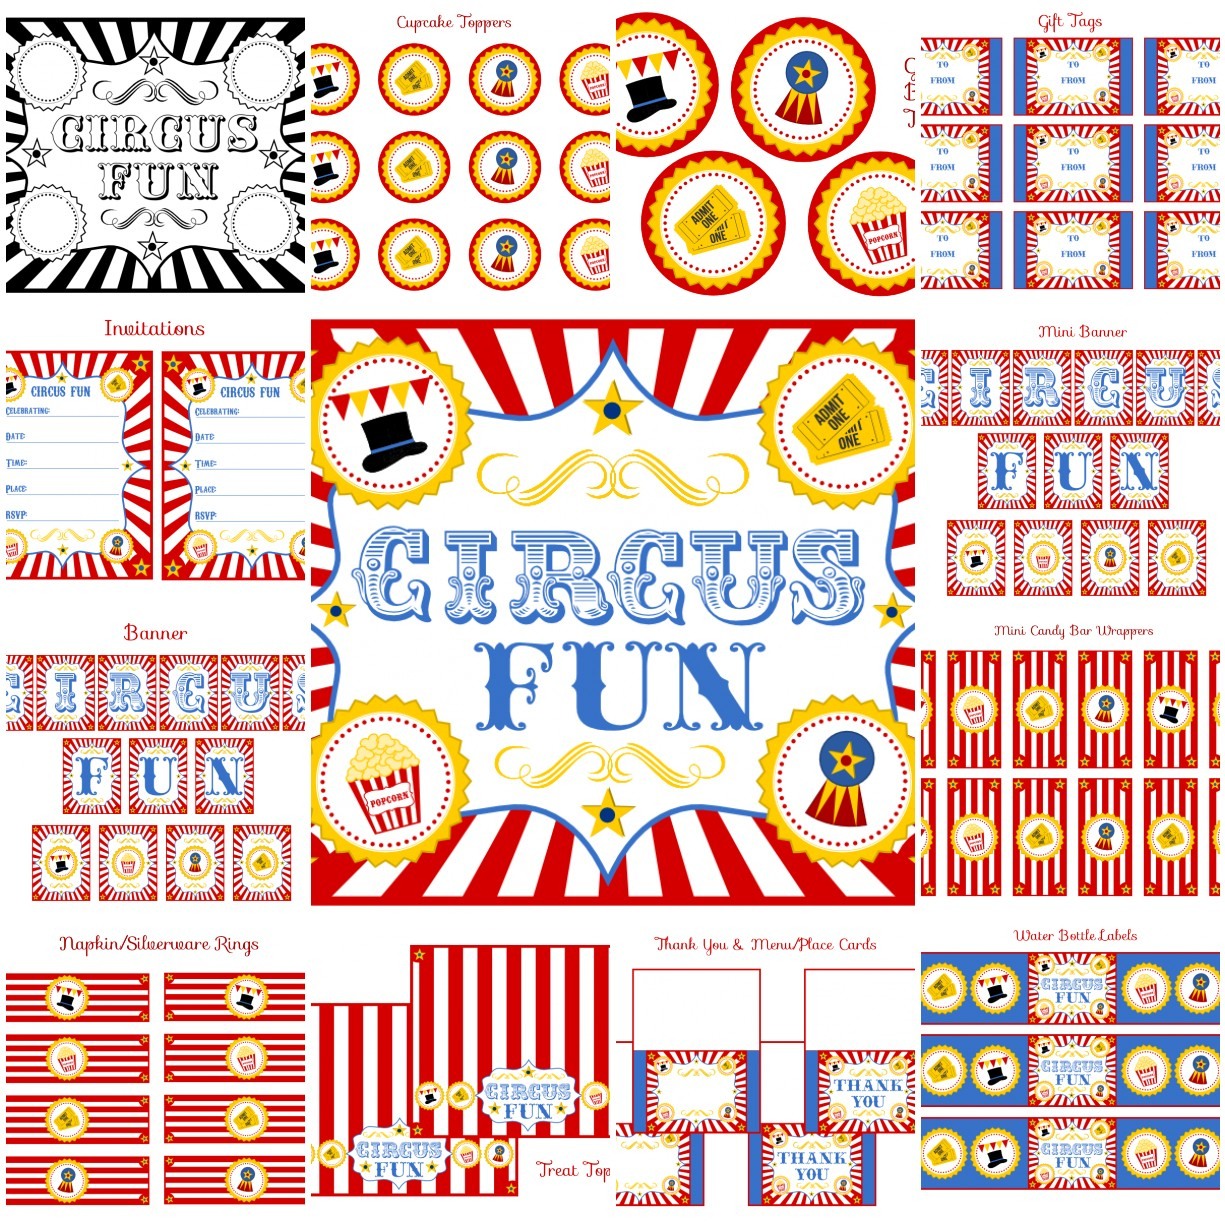 Free Circus Birthday Party Printables From Printabelle | Catch My Party - Free Printable Party Signs